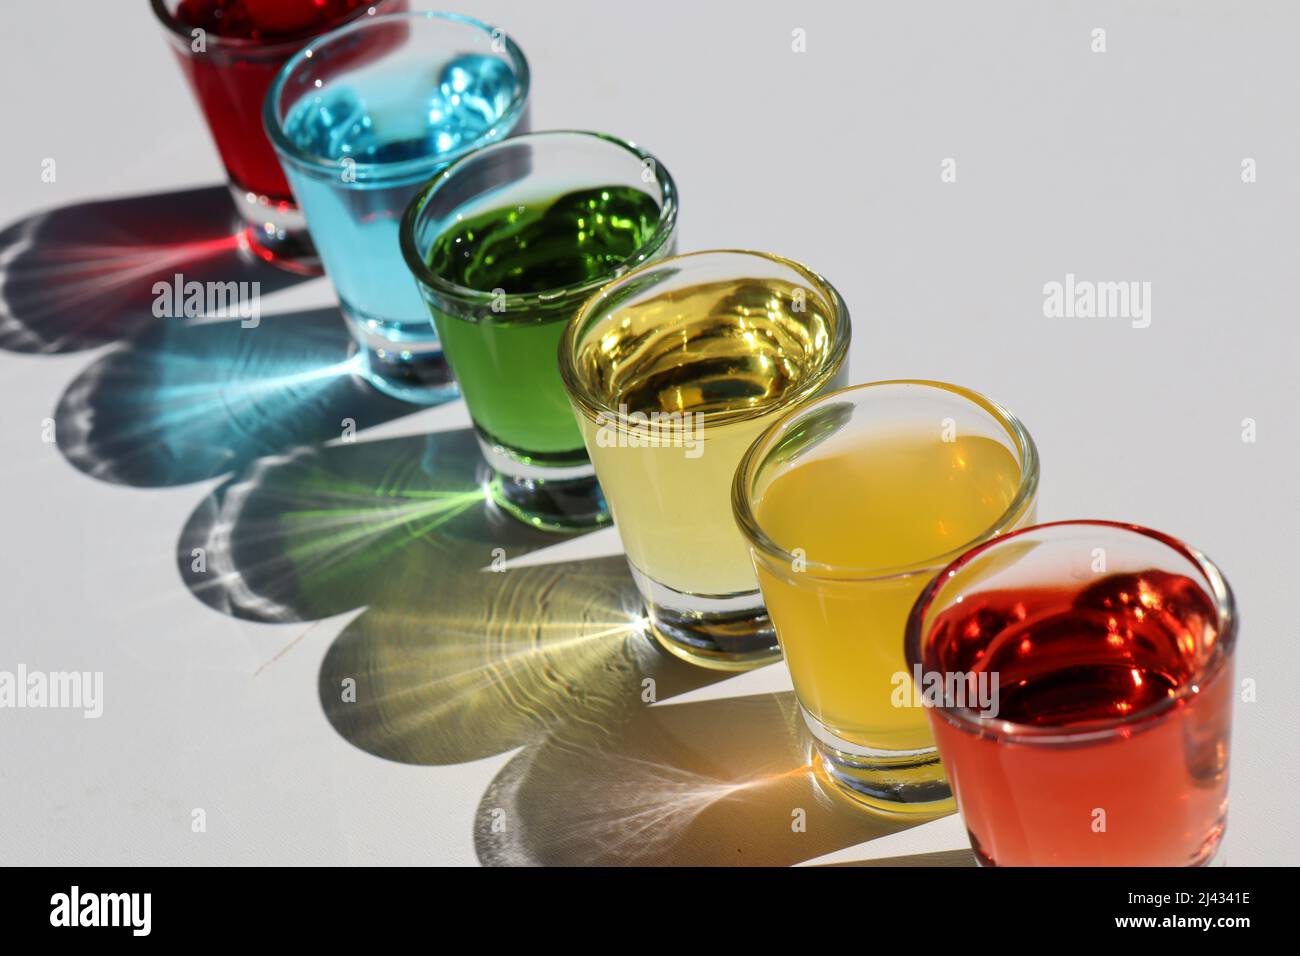 Rainbow drinks glasses with shadows and light distortion Stock Photo